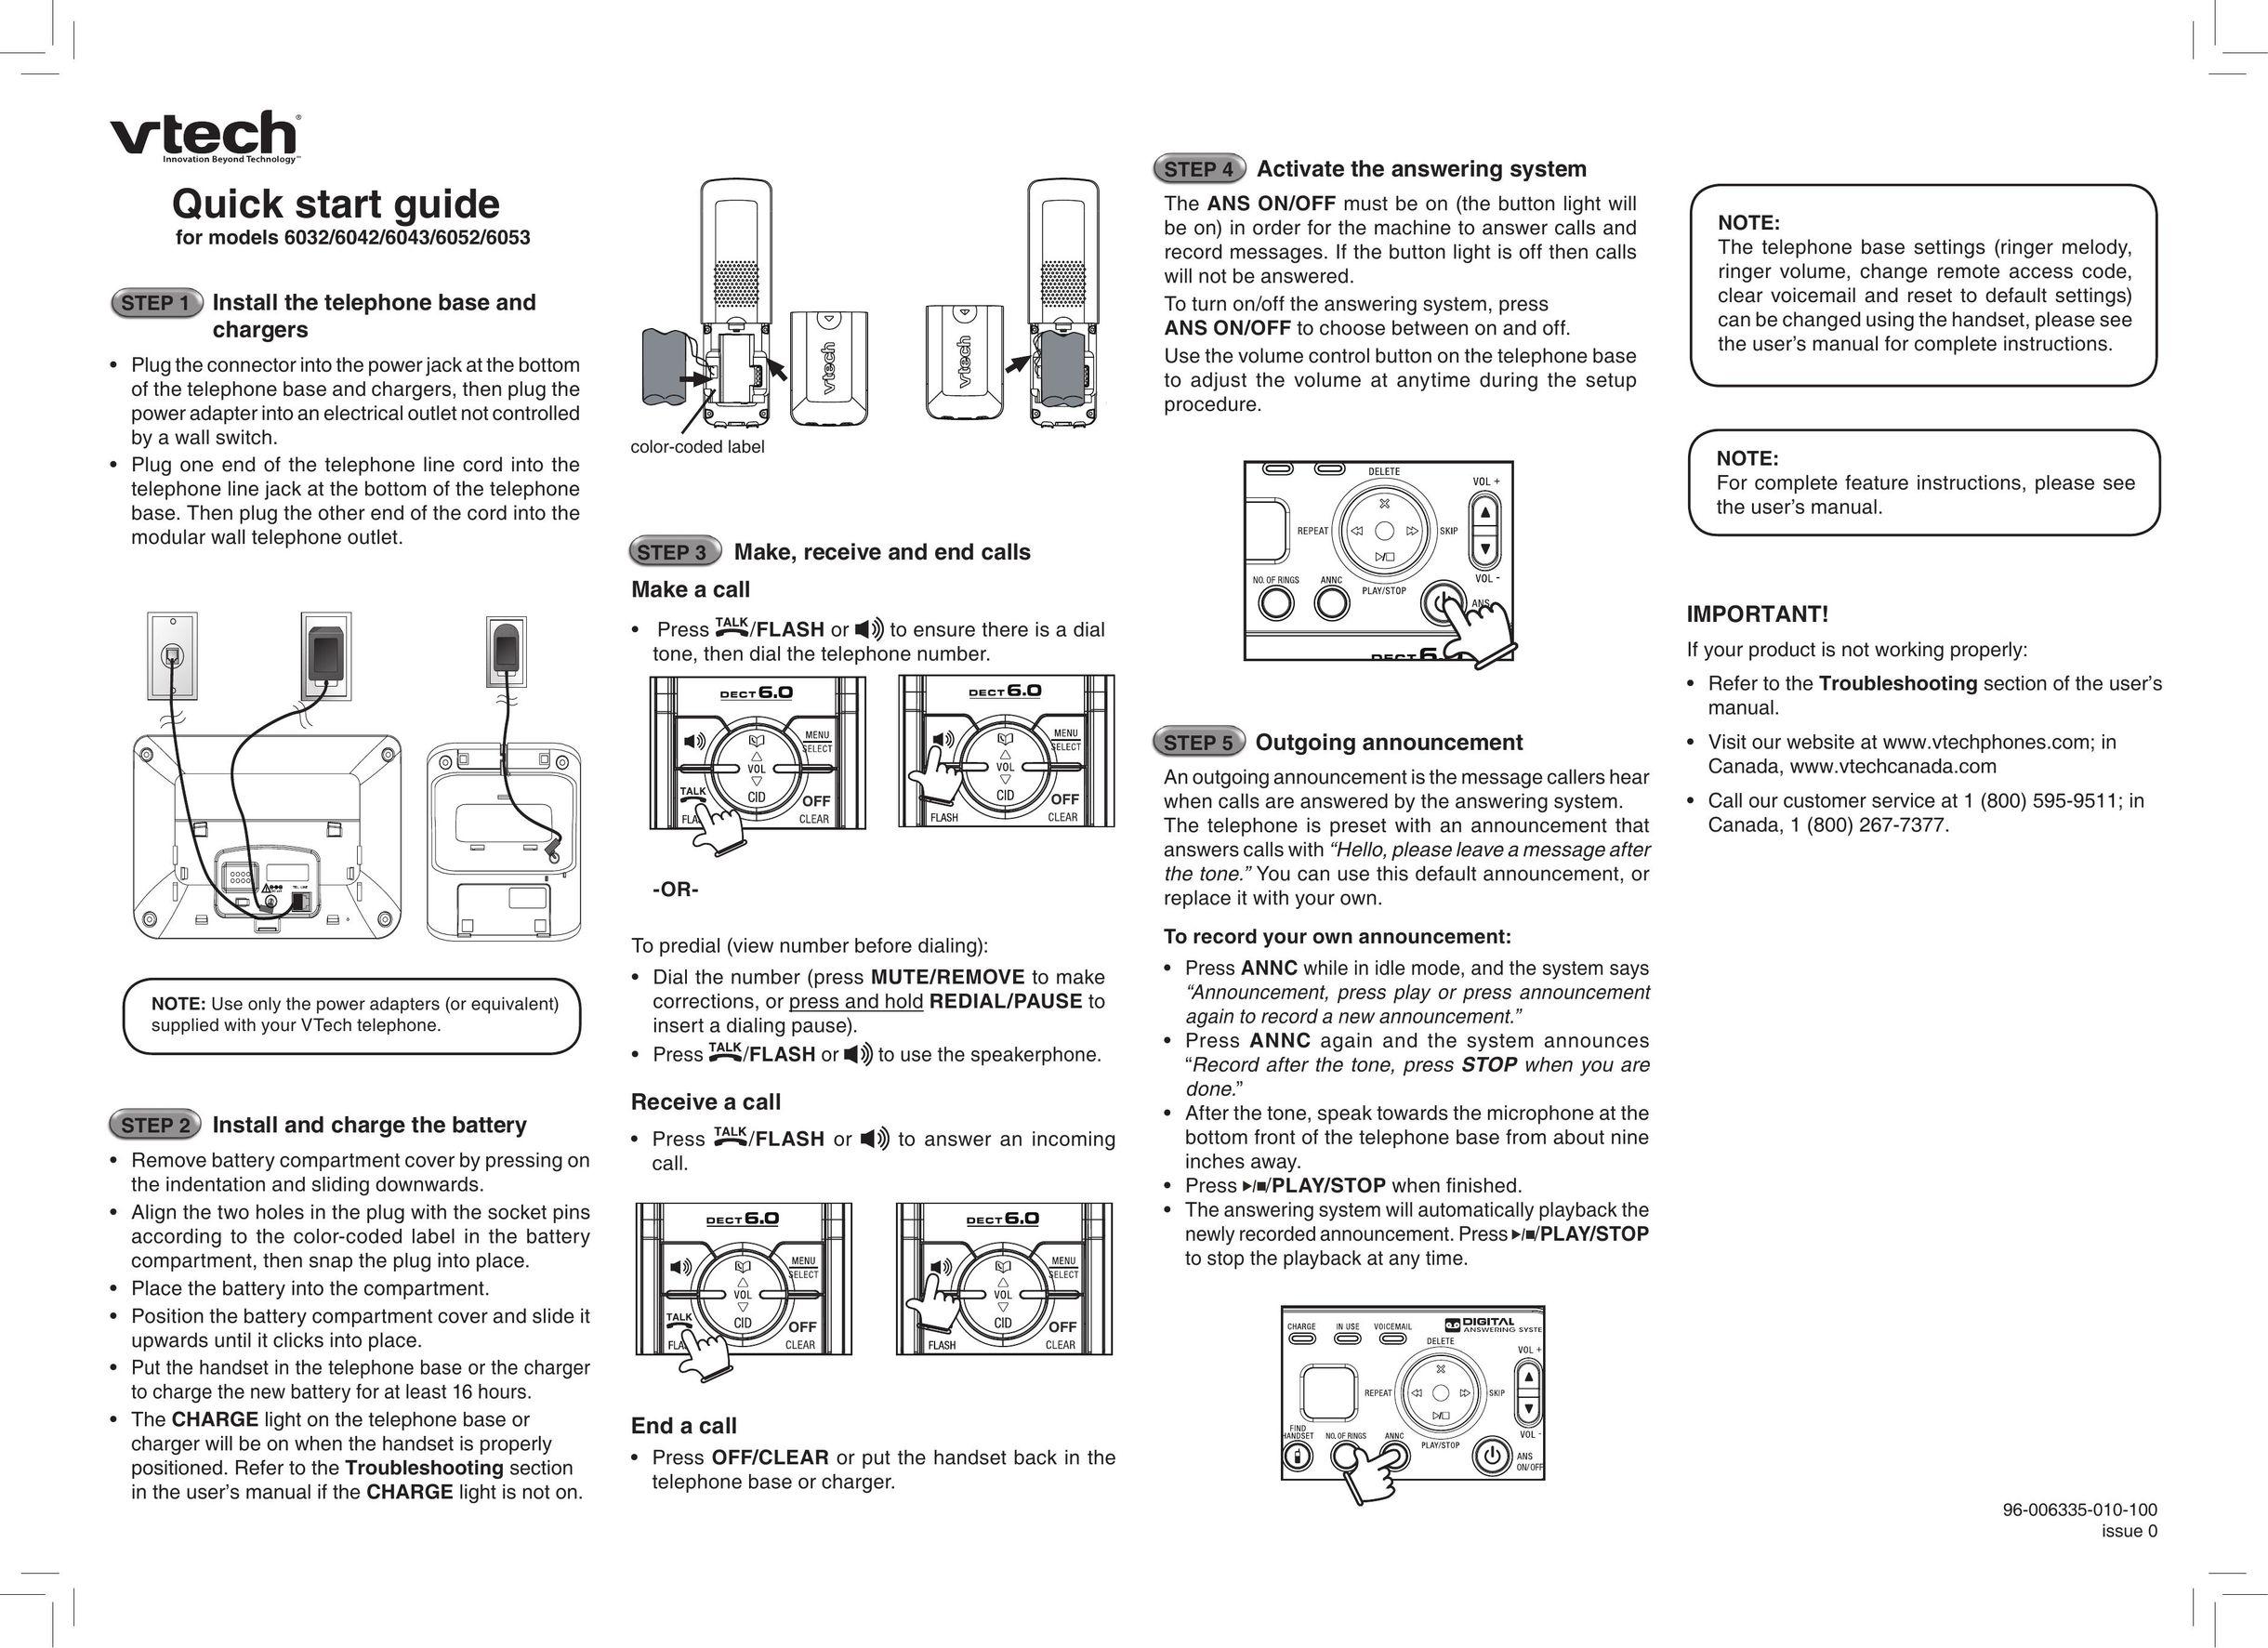 VTech 6053 Home Security System User Manual